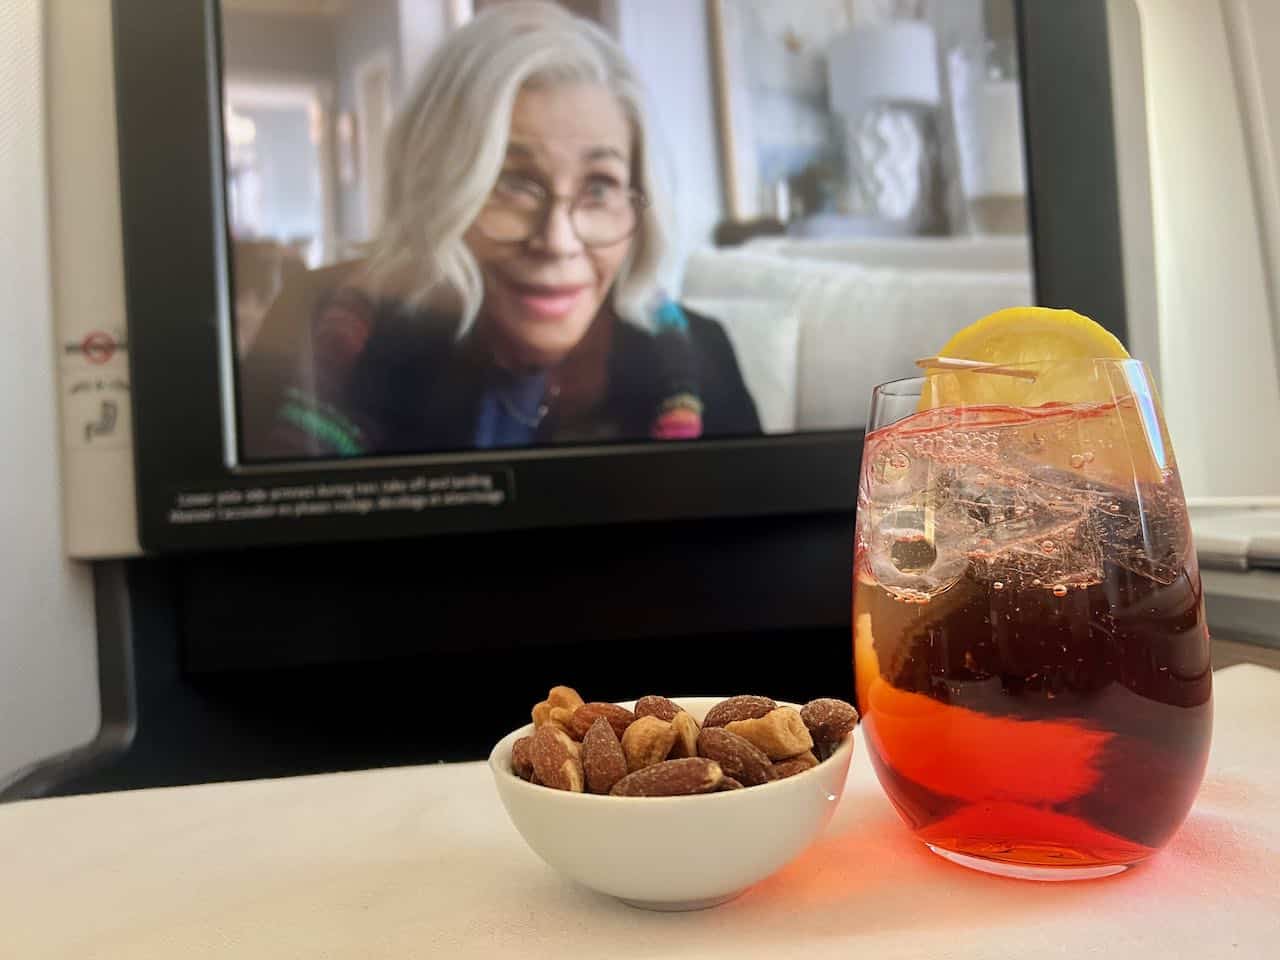 Begin your flight from Canada to Thailand with roasted nuts and Aperol Spritz.